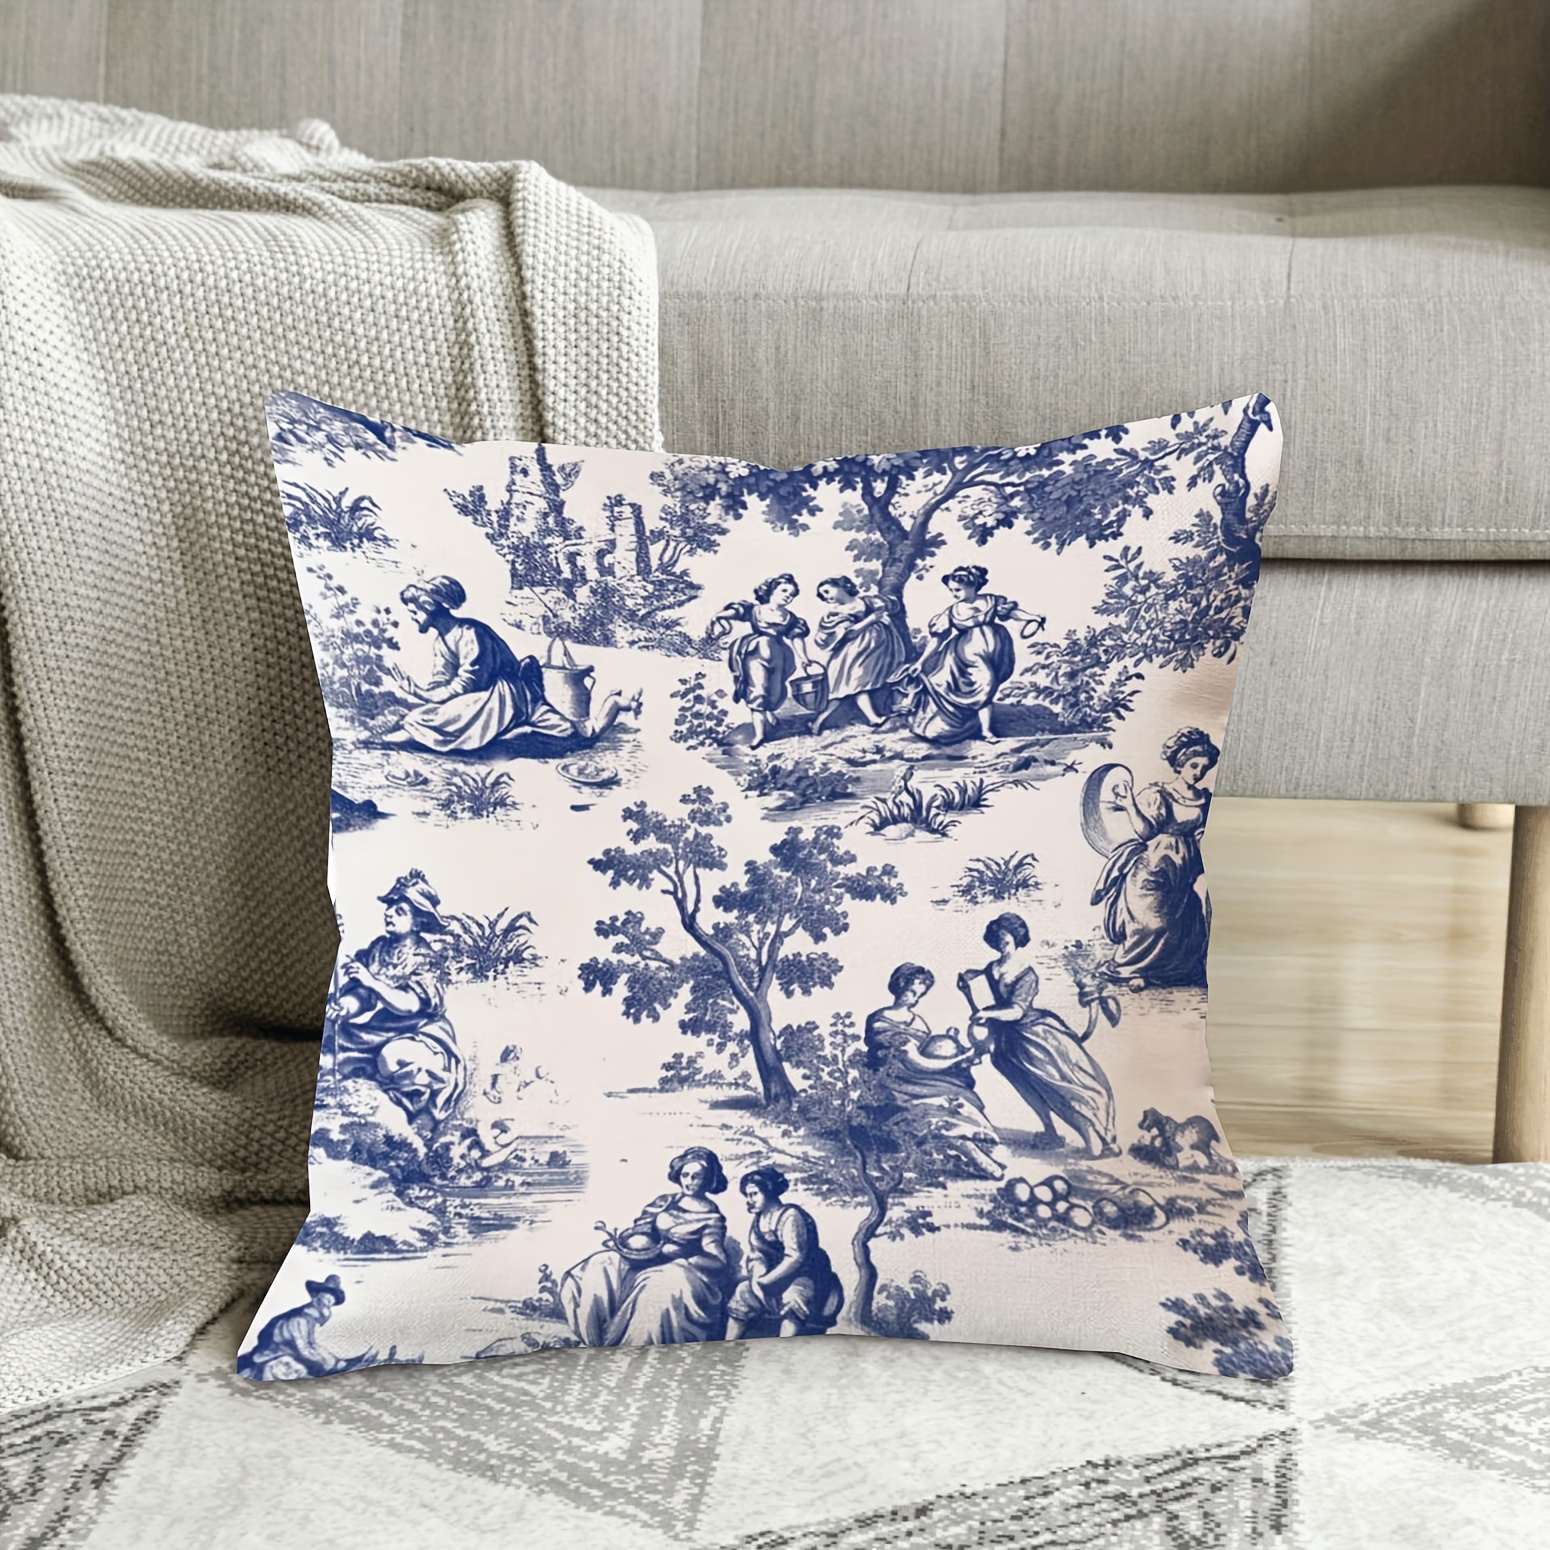 

1pc, Navy Blue White Decorative Blue Toe Printed Pillowcase, French Countryside Cushion Cover, Square Pillowcase, Sofa, Living Room, Home Decoration 18x18 Inches